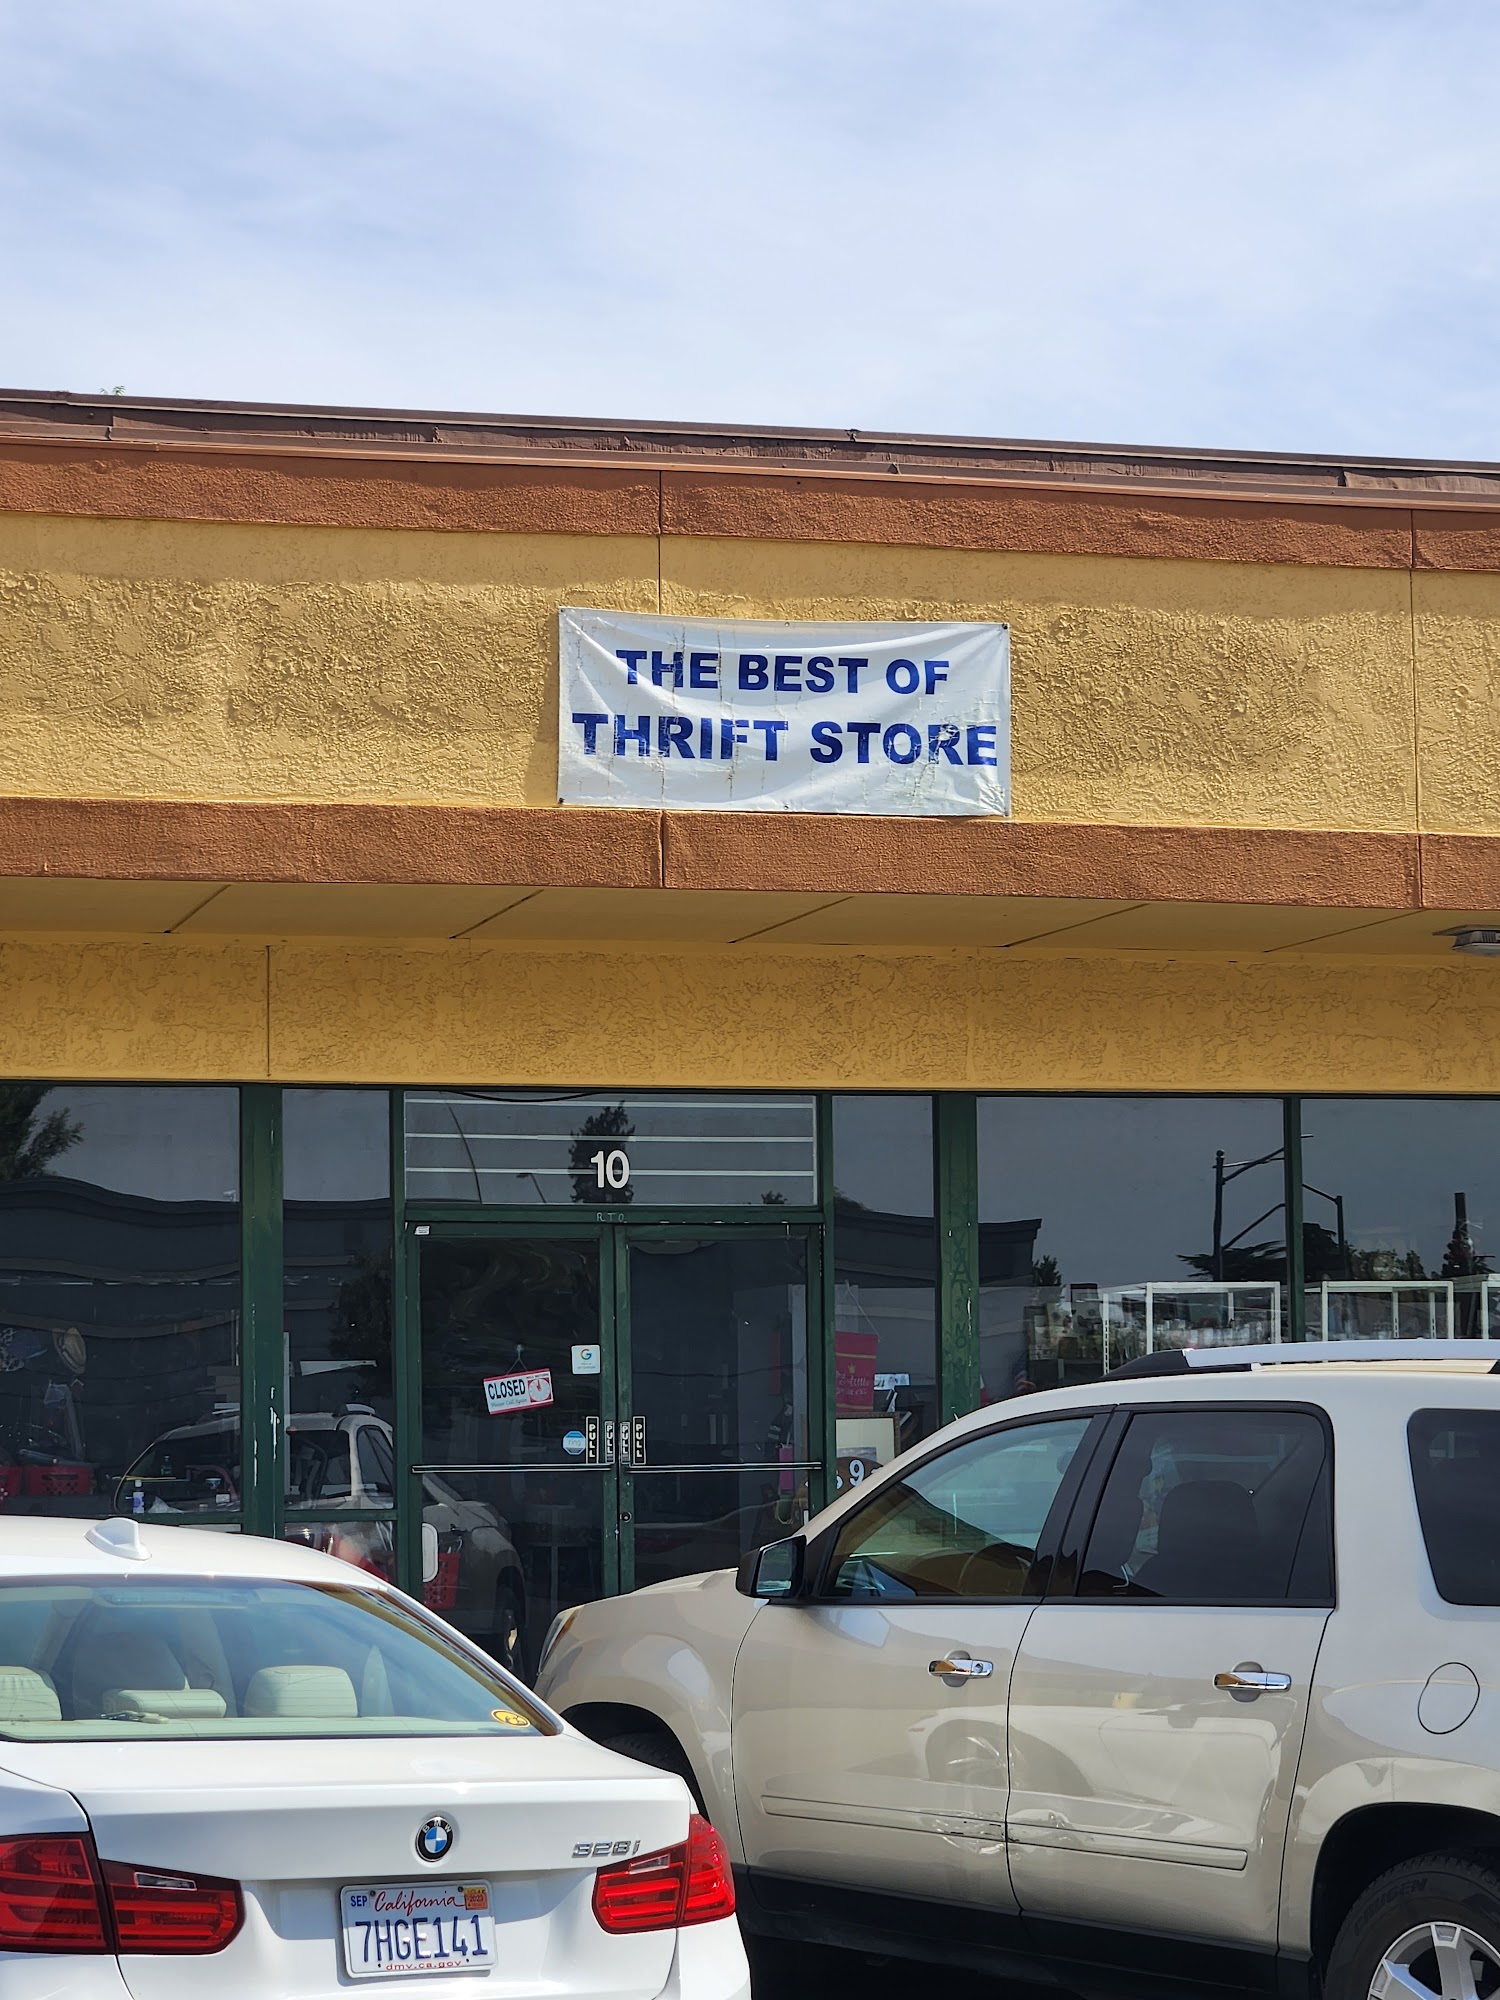 The Best of Thrift Store